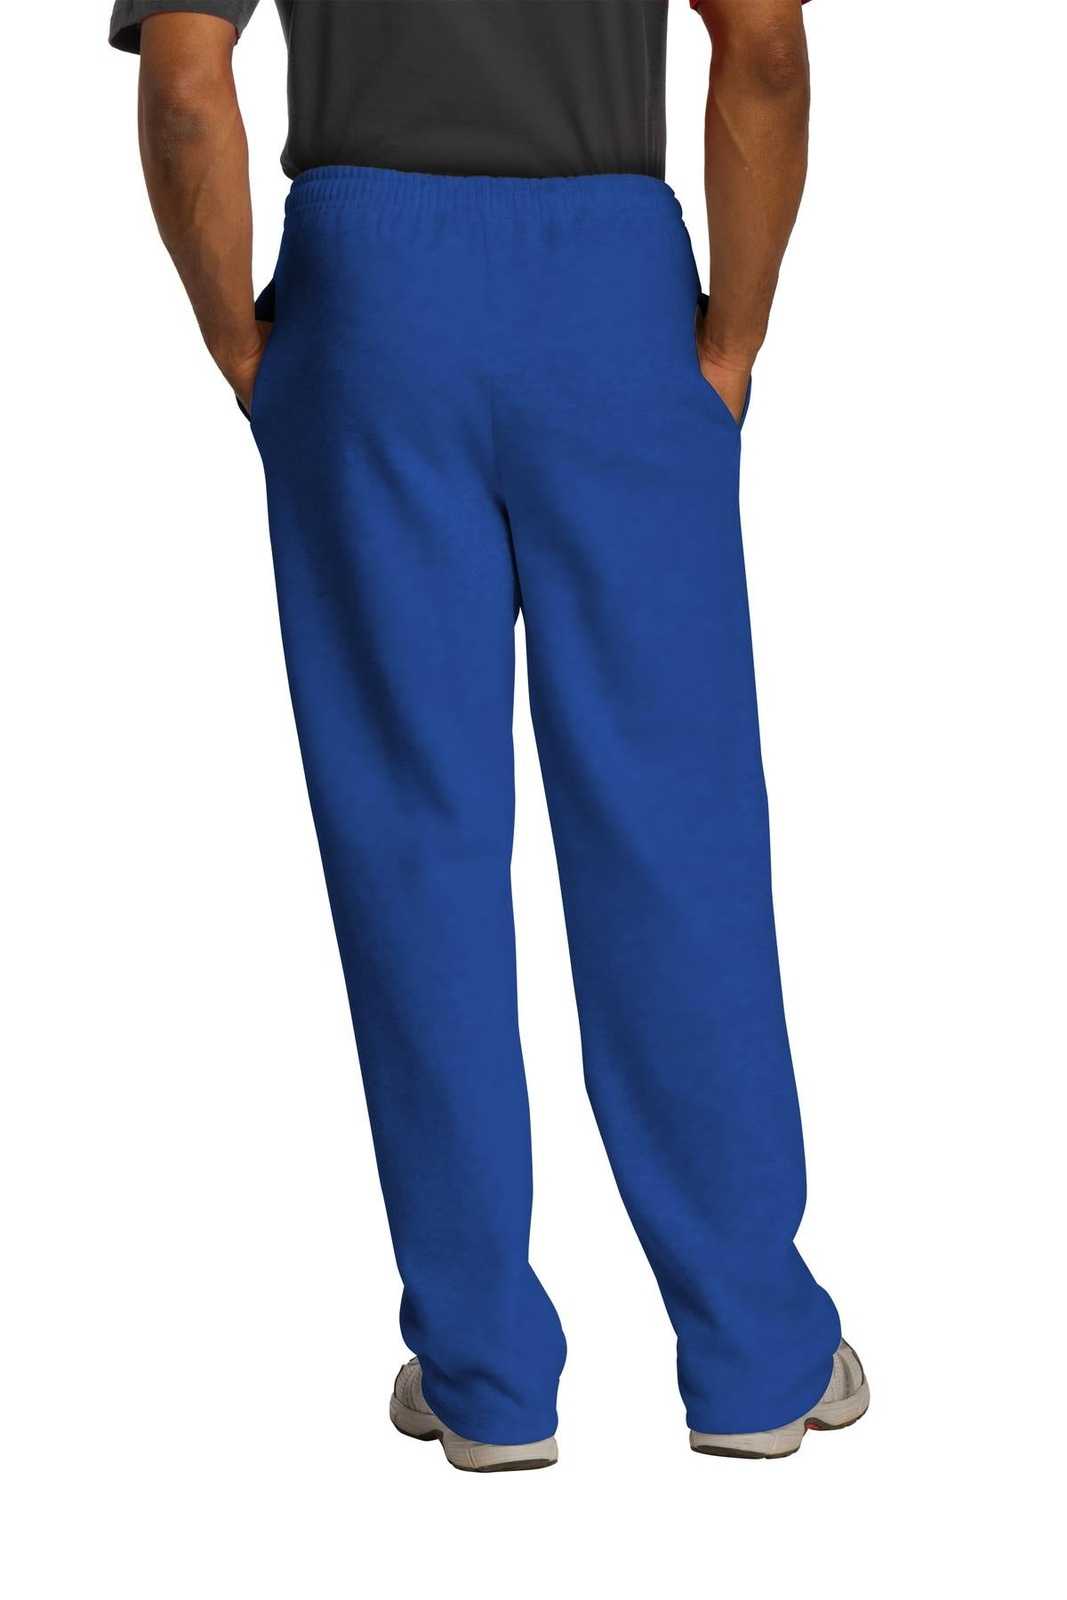 Jerzees 974MP Nublend Open Bottom Pant with Pockets - Royal - HIT a Double